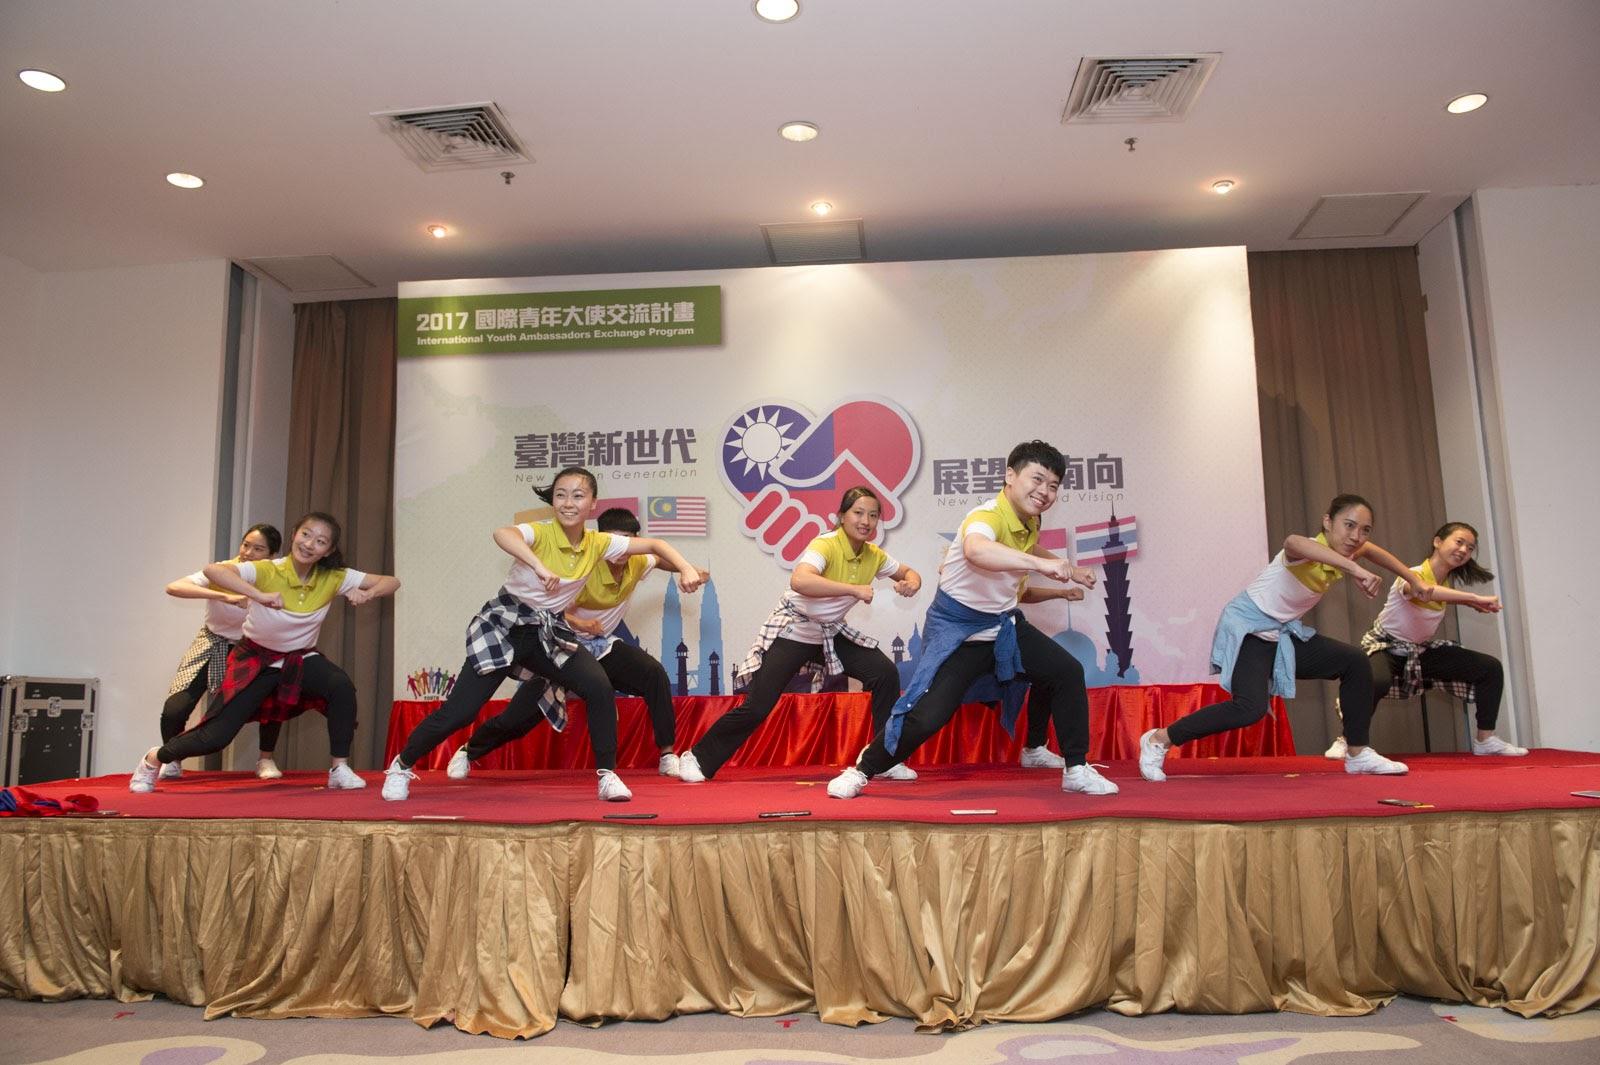 Youth Ambassadors performed in “Taiwan Culture Night” on 5th of September.